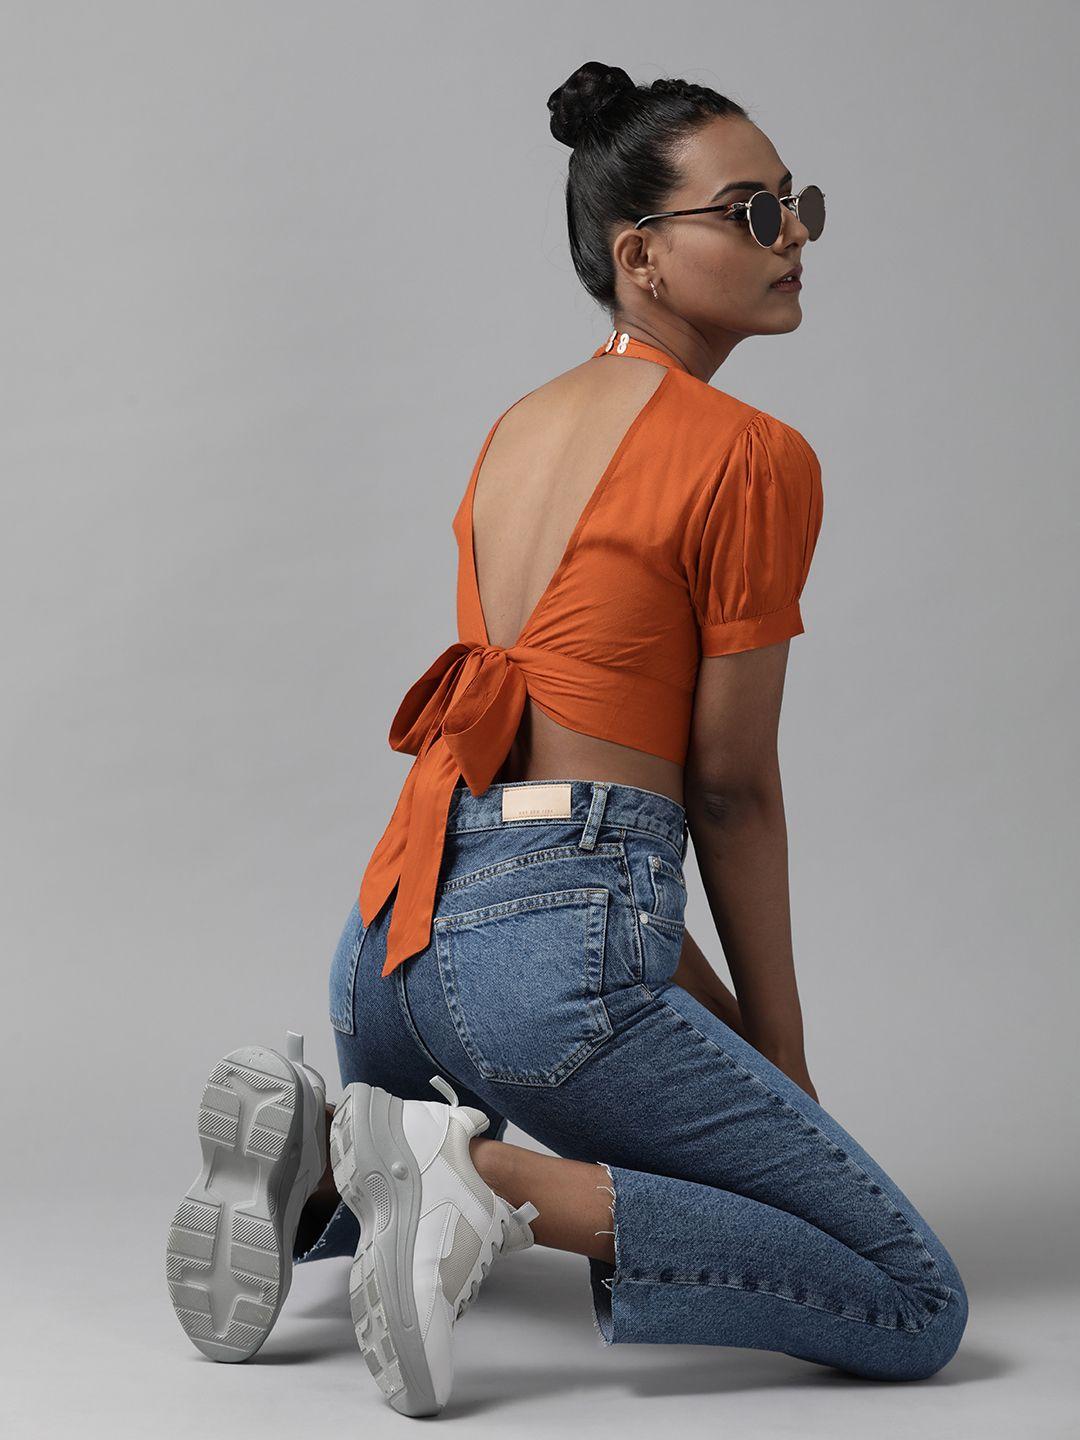 the-dry-state-rust-orange-mandarin-collar-crop-top-with-styled-back